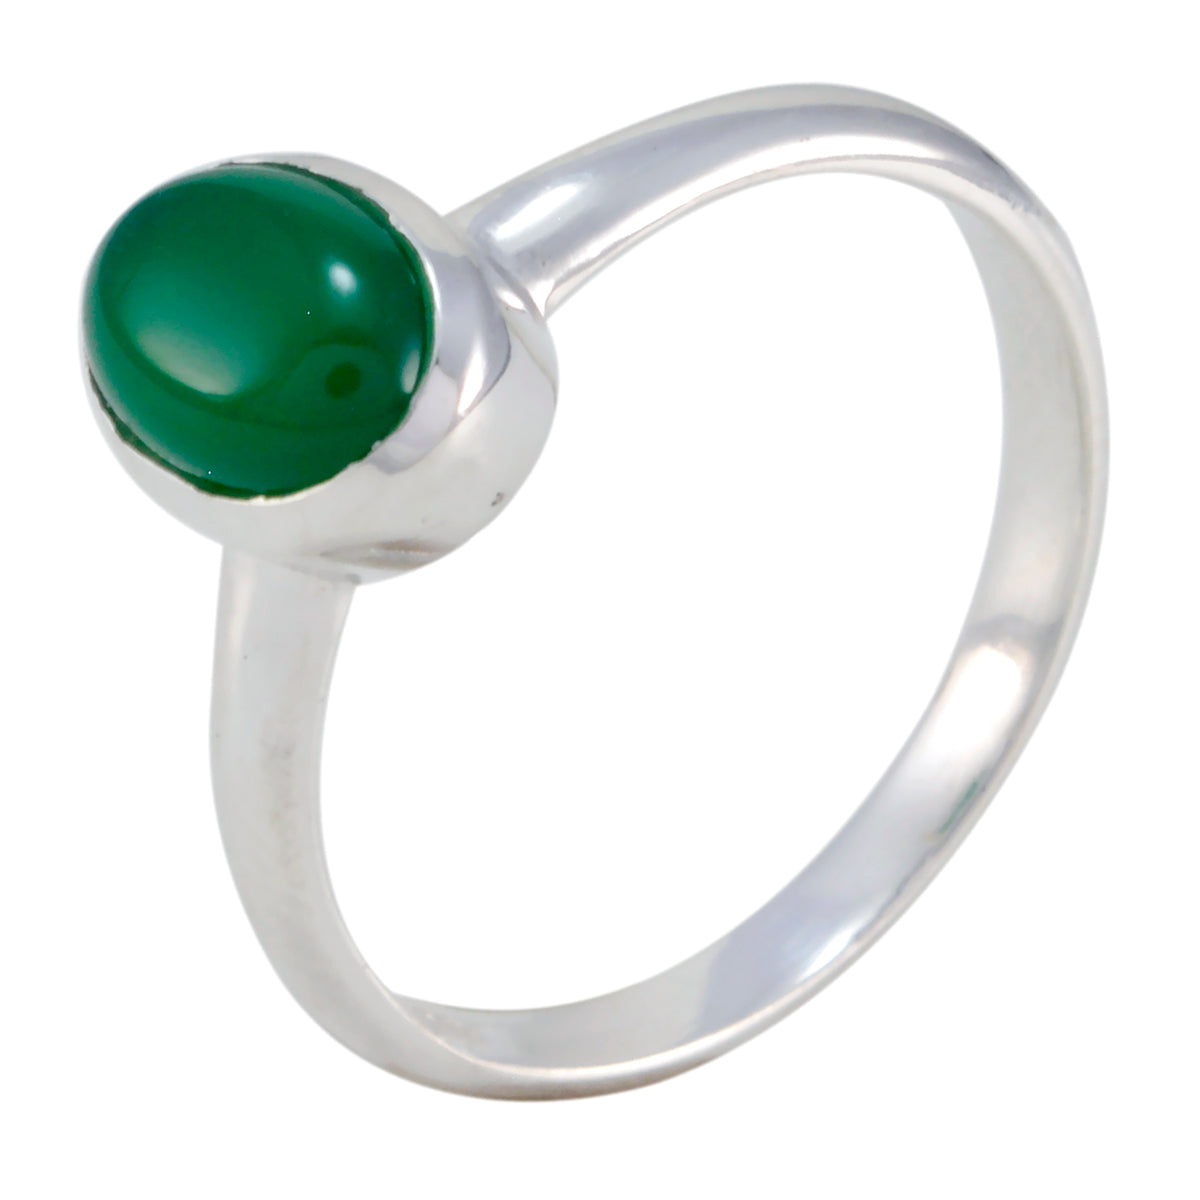 Radiant Gemstones Green Onyx Solid Silver Ring Jewelry Box Hardware